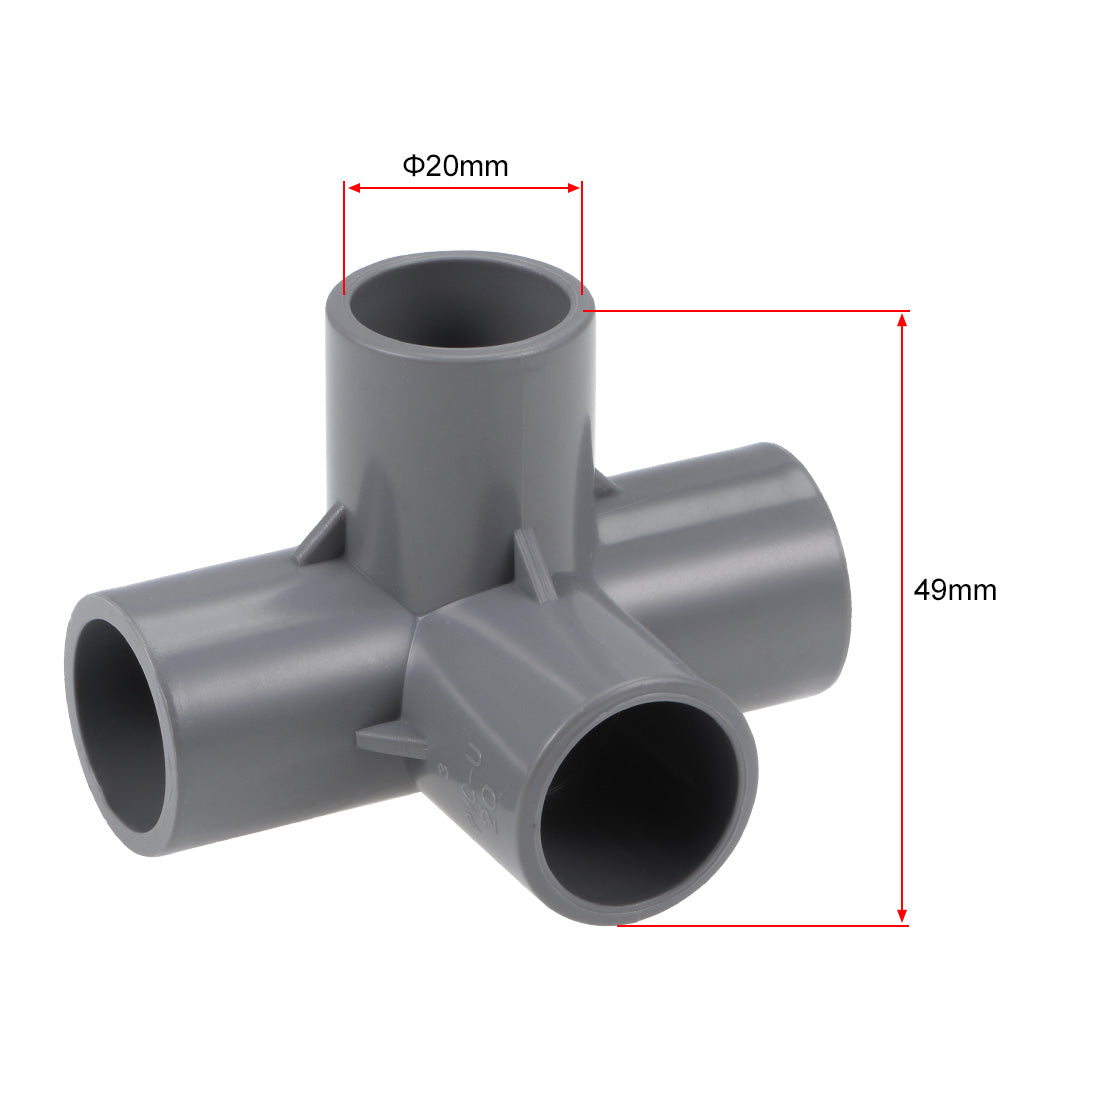 uxcell Uxcell 4 Way 20mm Tee Metric PVC Fitting Elbow - PVC Furniture - PVC Elbow Fittings Gray 10Pcs